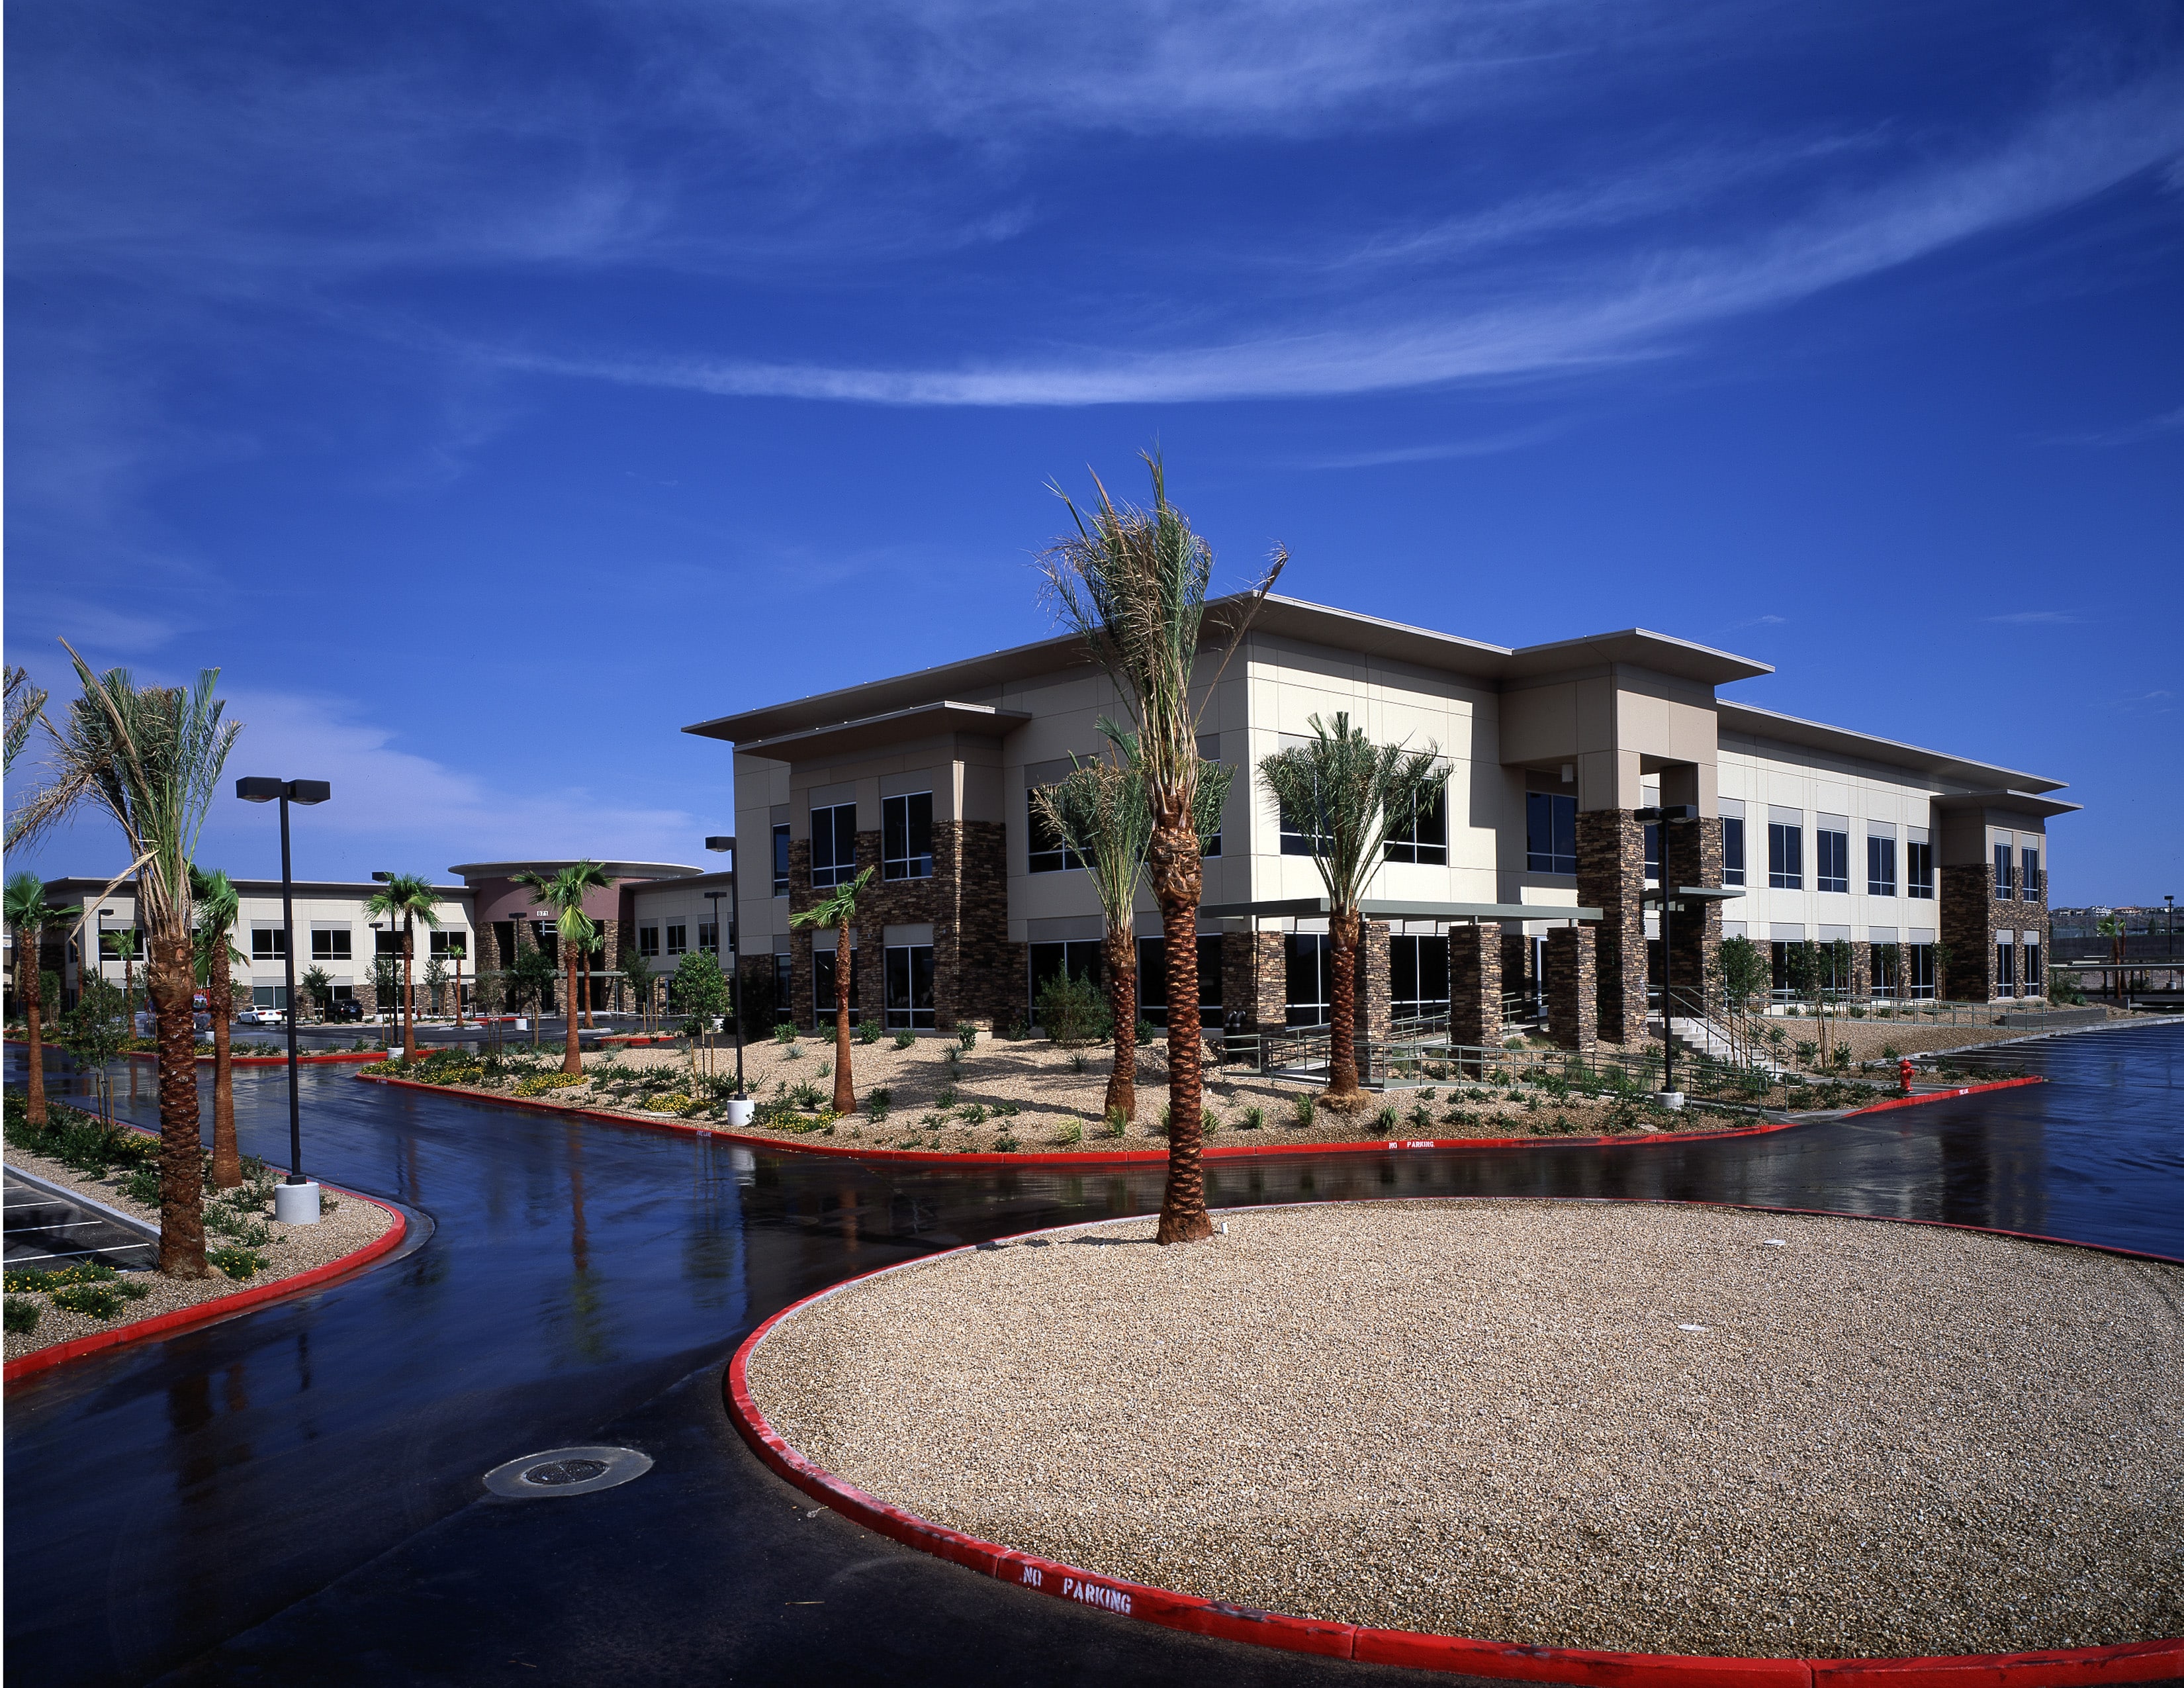 Siena Office and Retail ParkRecognized as the premiere office park and core medical campus in the City of Henderson, Siena Office Park supports St. Rose Hospital and satisfies the business needs of the surrounding communities.  Siena Office Park provides the convenience, technology, and quality construction expected by its tenants.  The park consists of approximately 380,000 square feet and is home to physicians, dentists, outpatient treatment and imaging centers, laboratories and other professional offices.